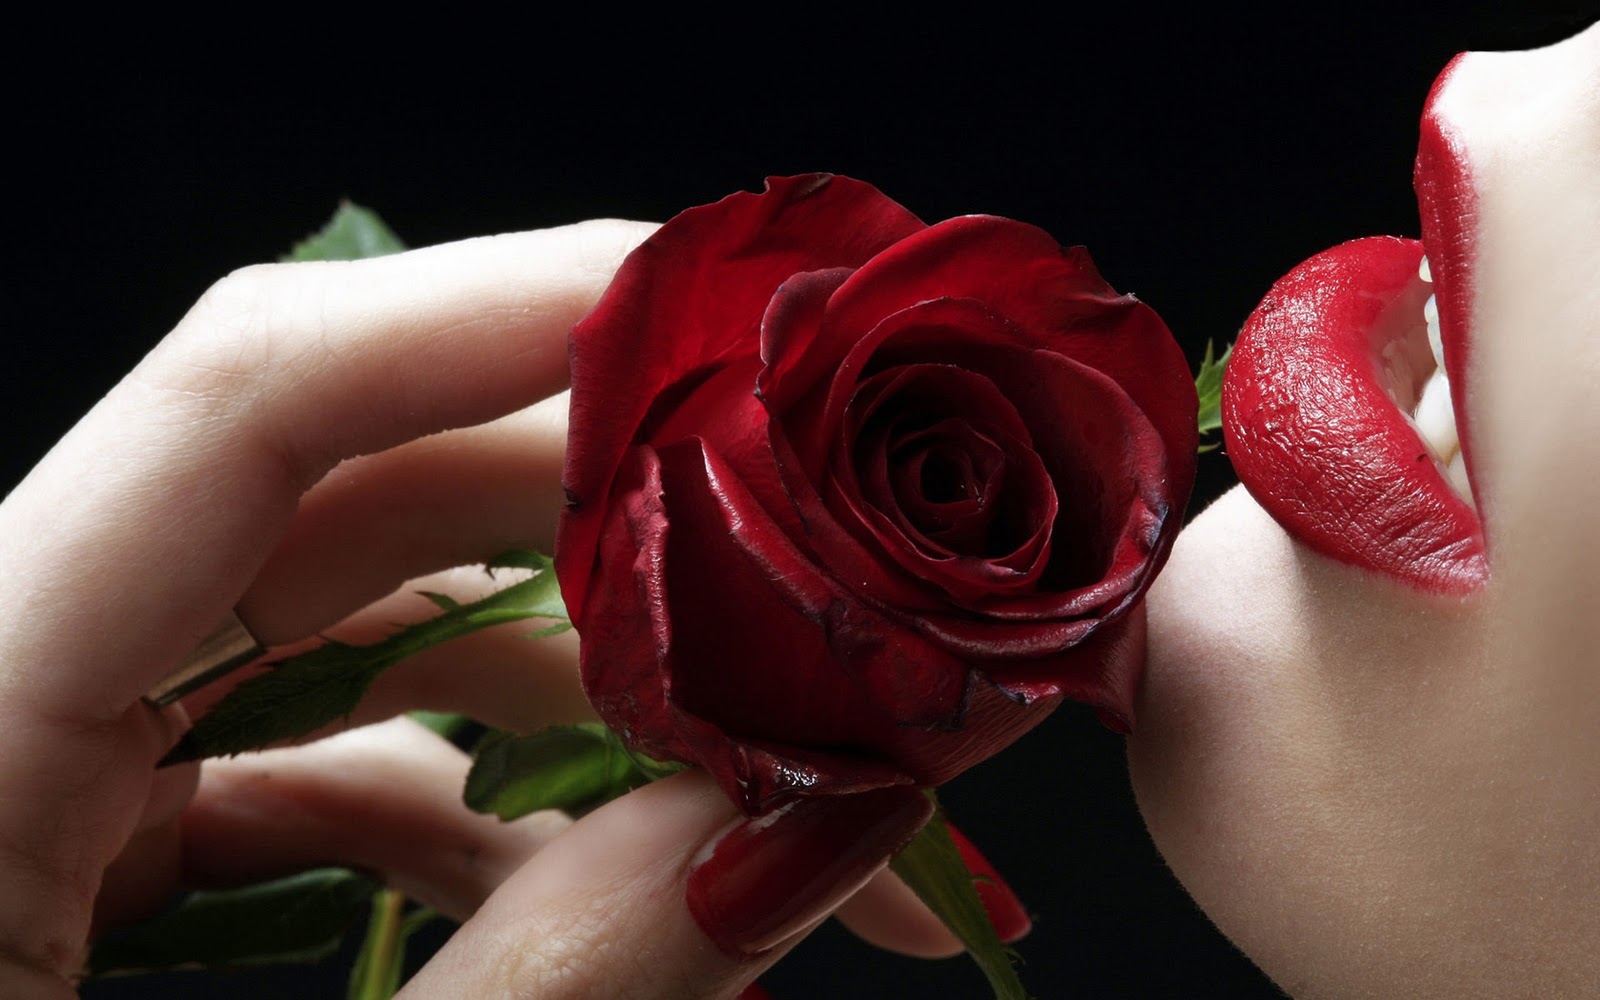 red rose larest hd kissing photo download | Daily pics update | HD ...